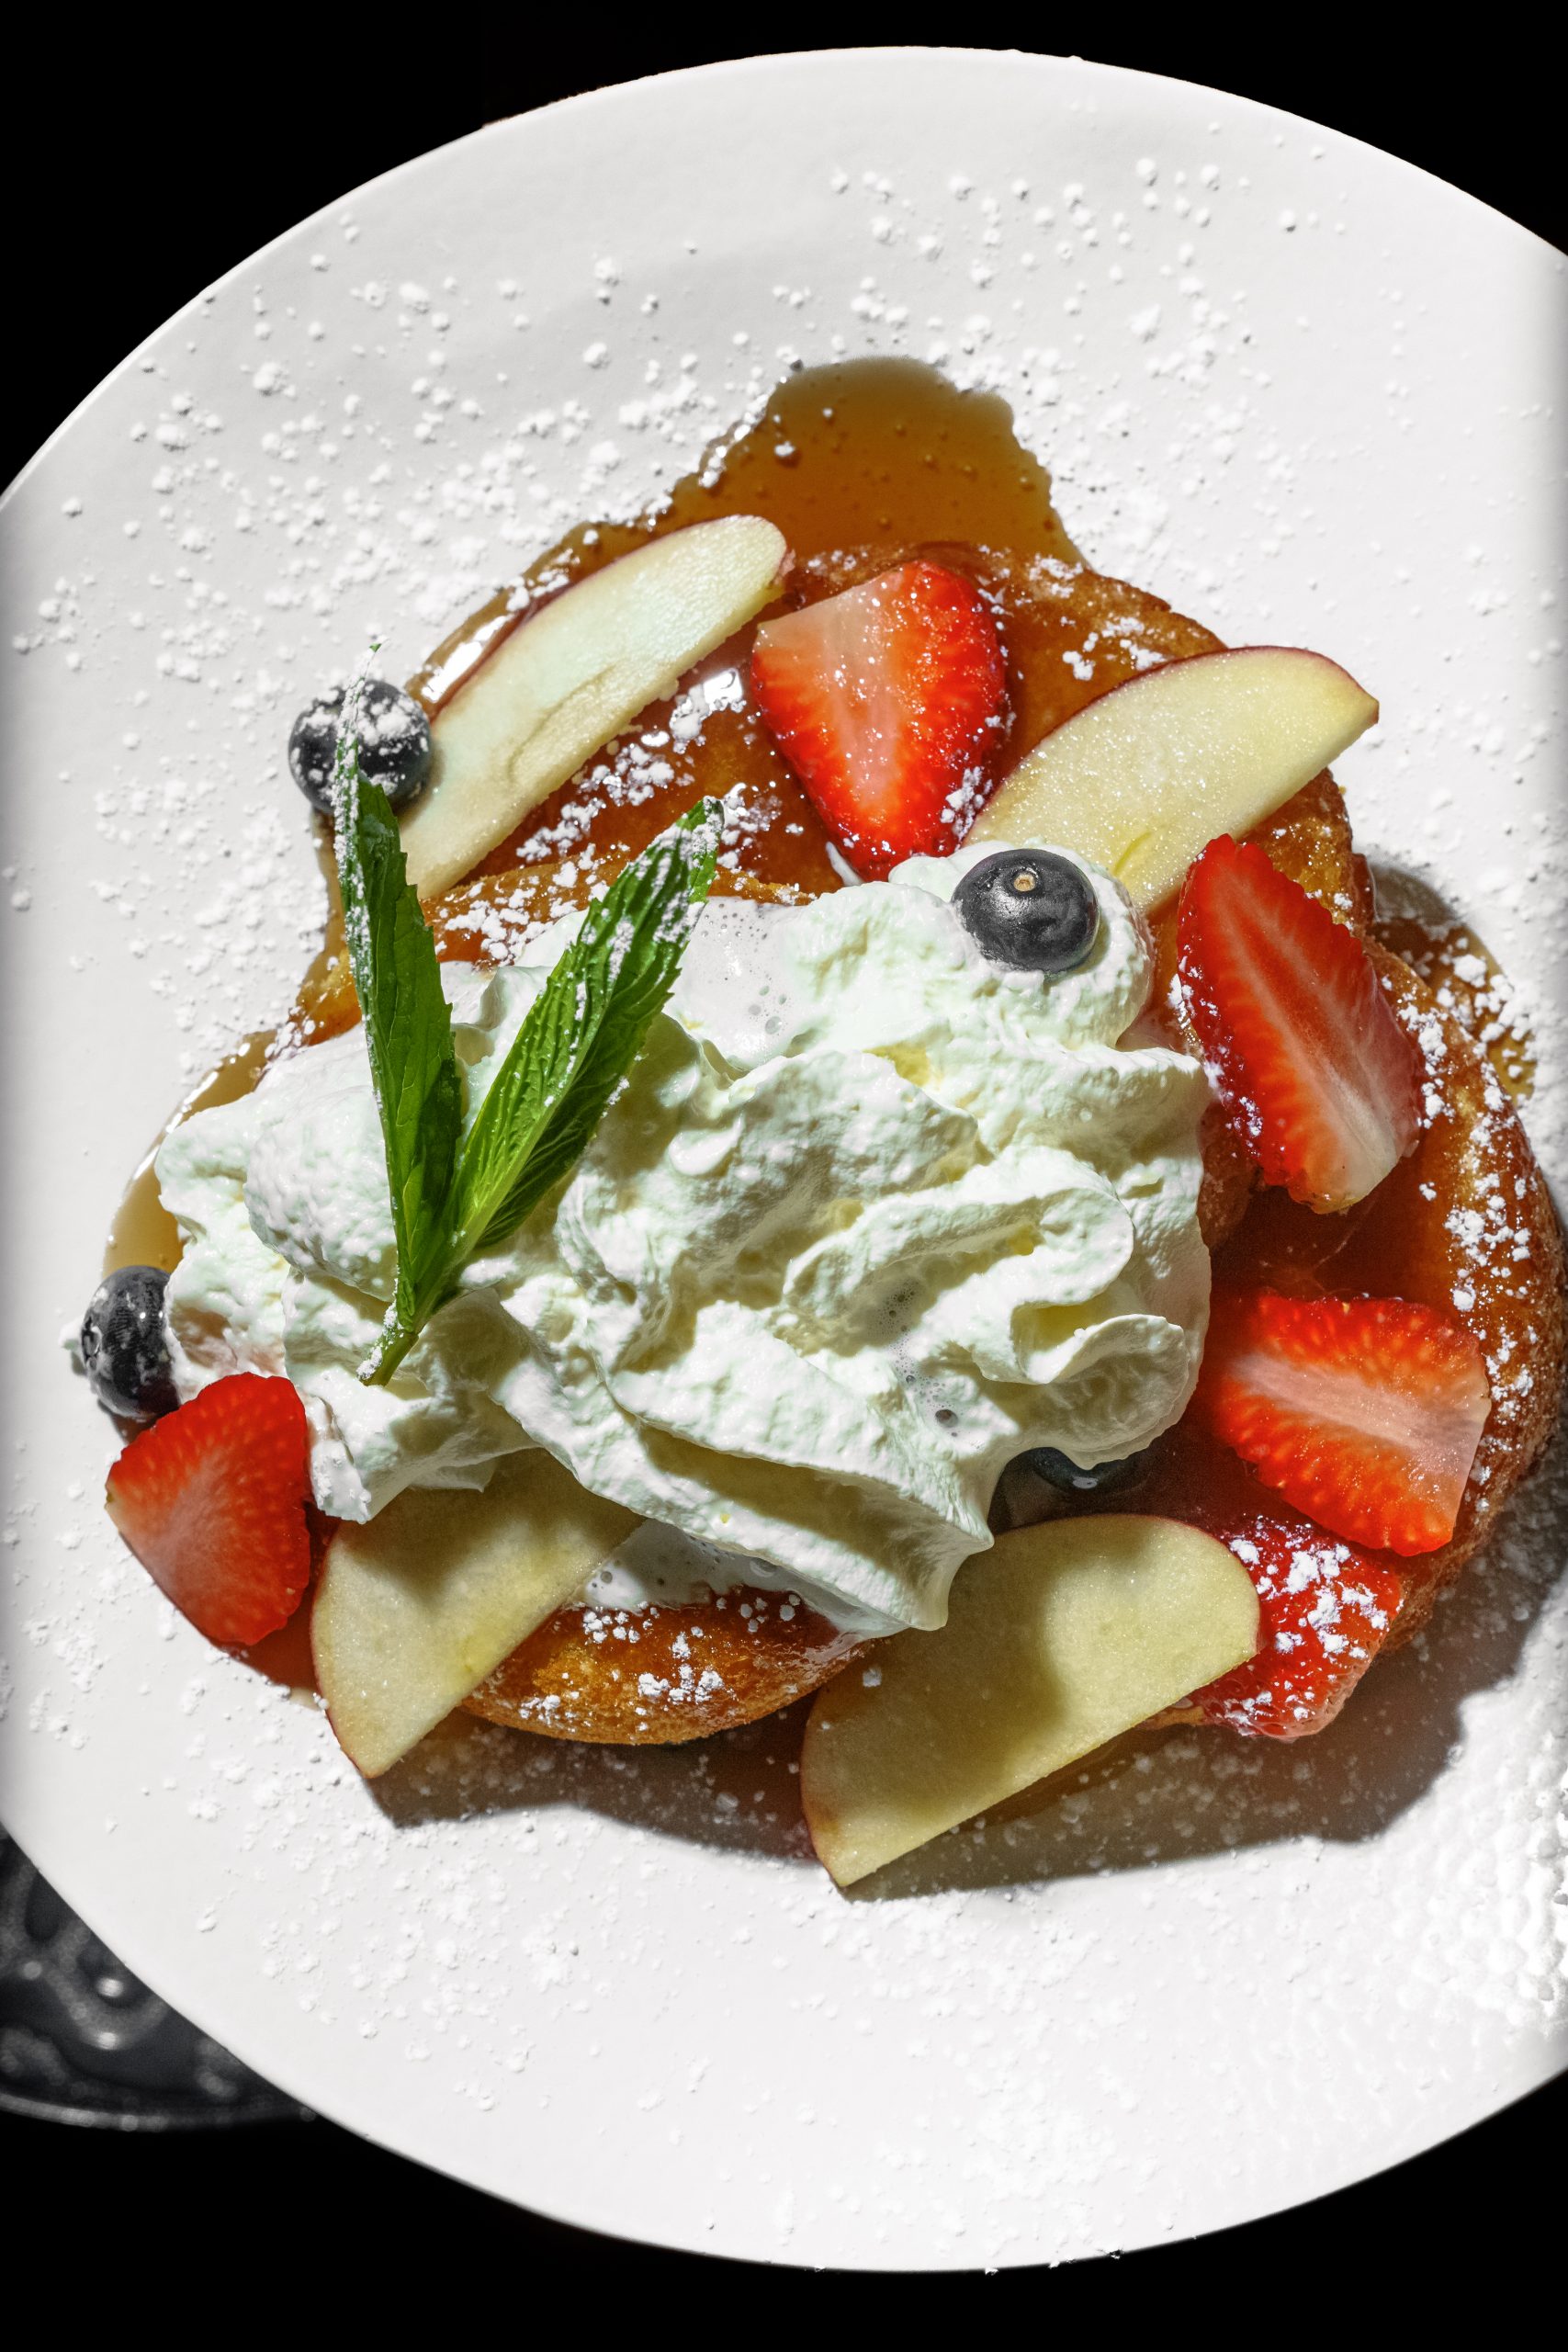 Pancake with fresh fruits and whipped cream